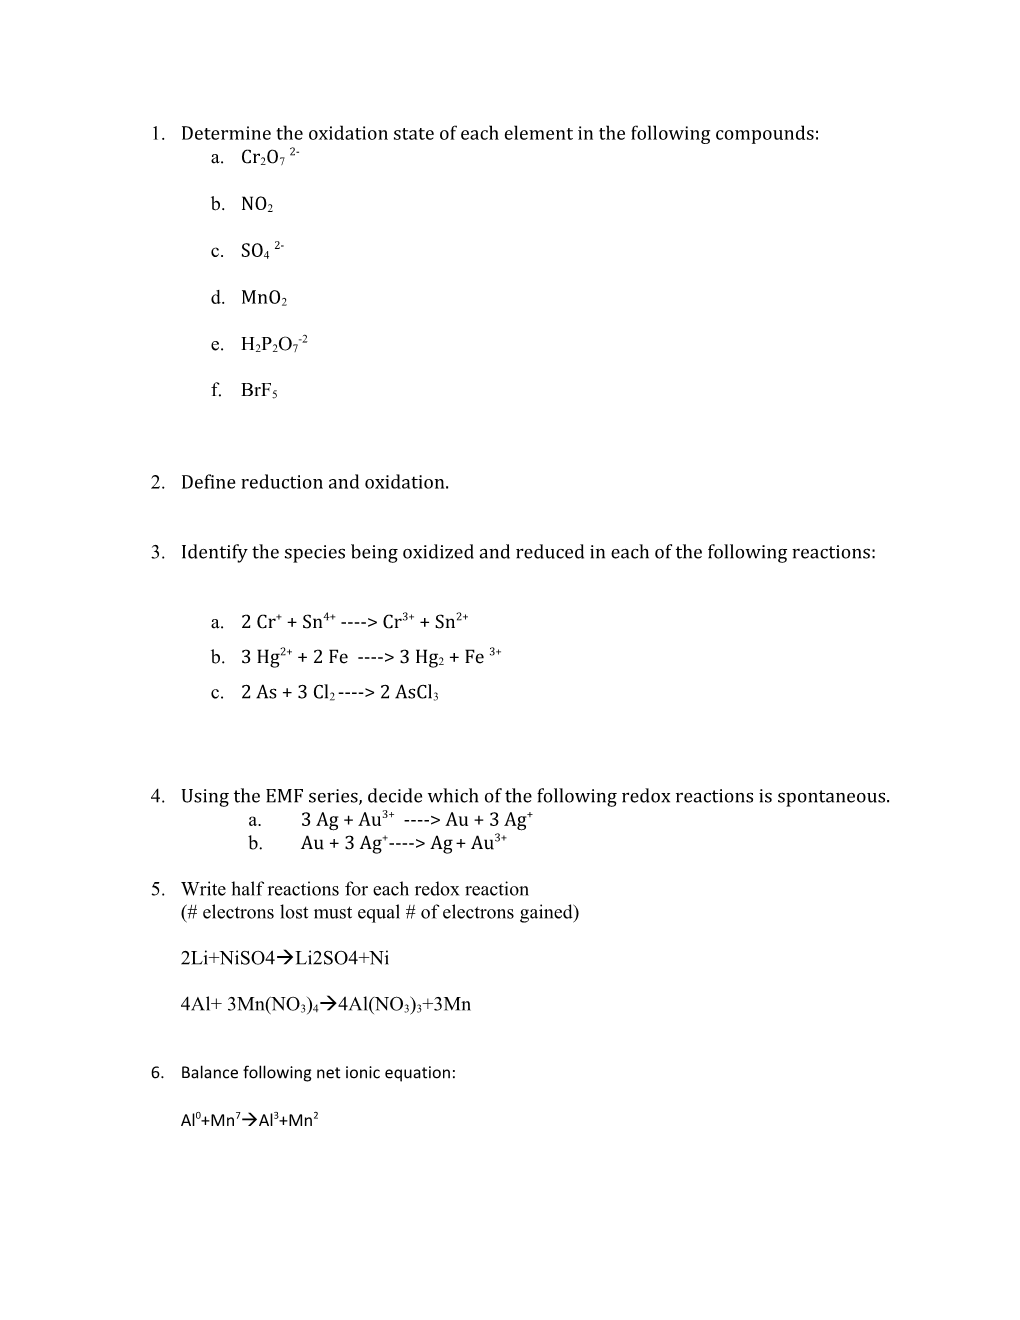 Determine the Oxidation State of Each Element in the Following Compounds